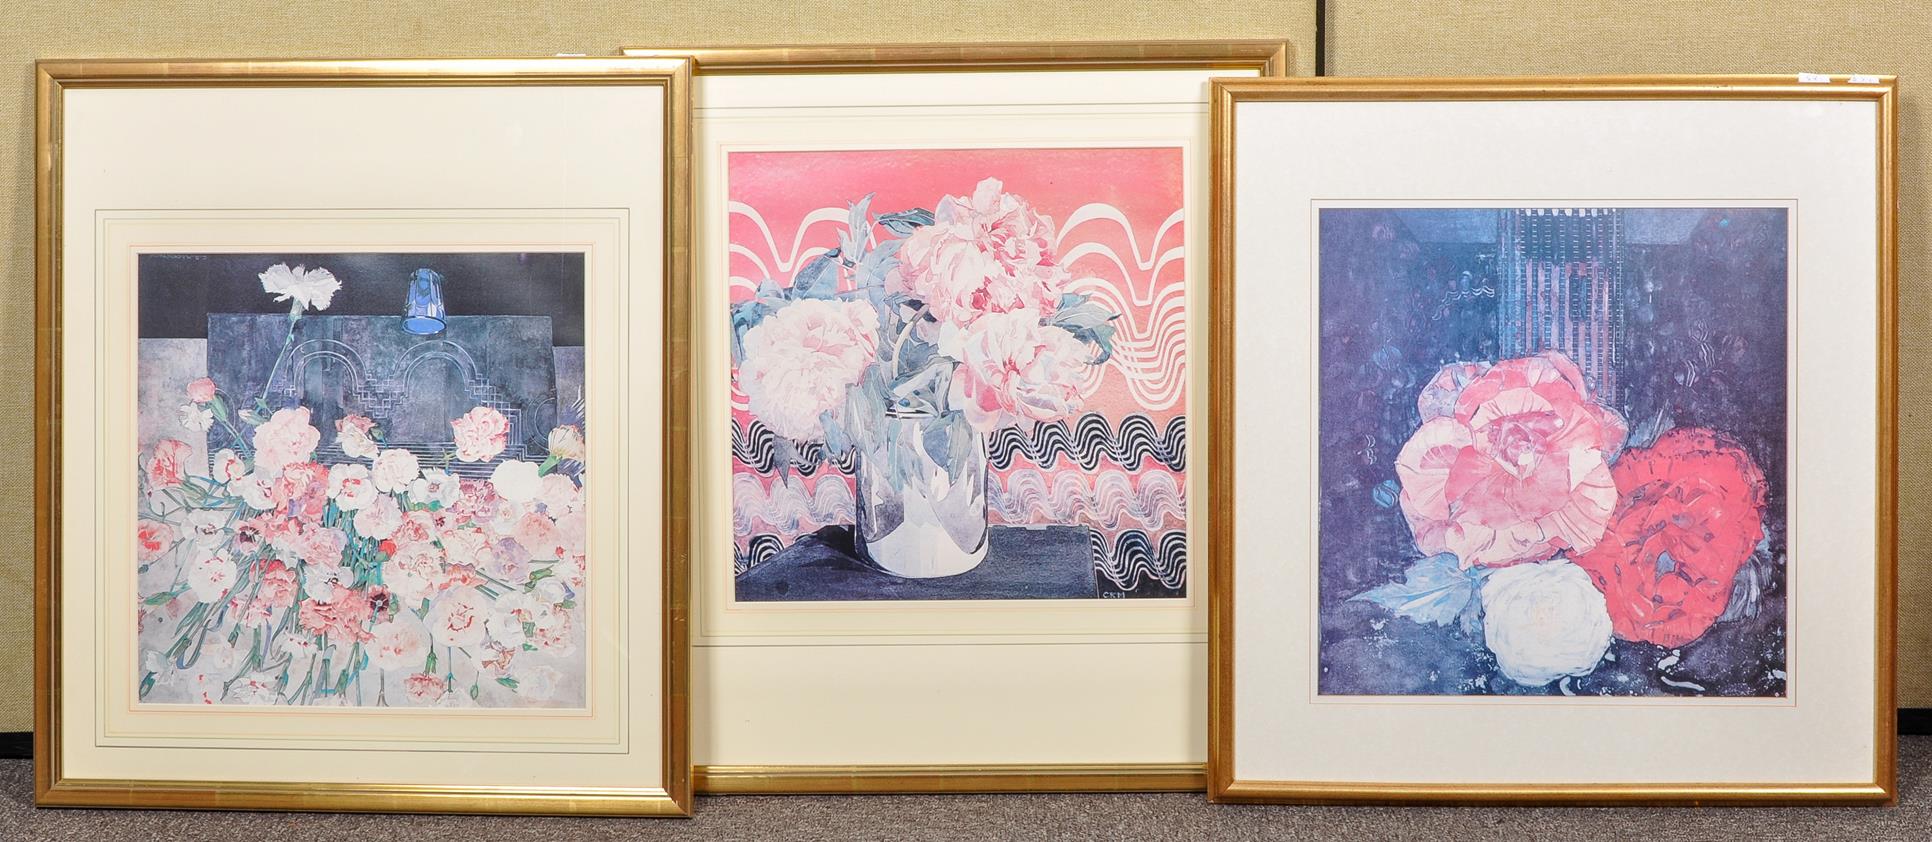 After Macintosh, Begonias print, framed and glazed along with two other prints.